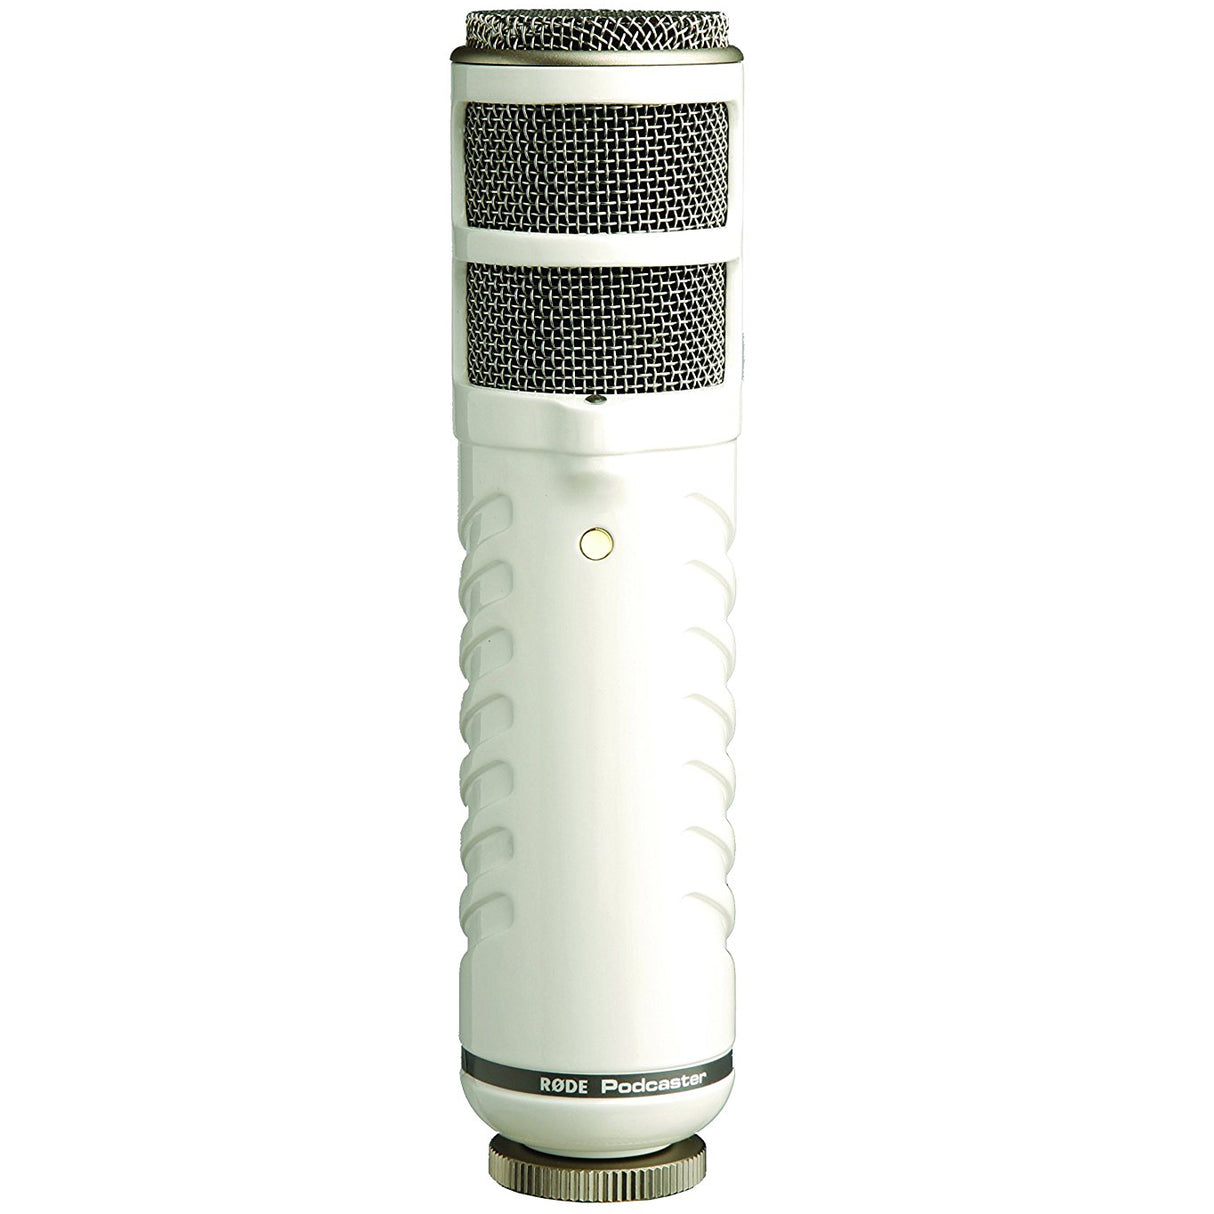 Rode Podcaster USB Dynamic Microphone (Grey)